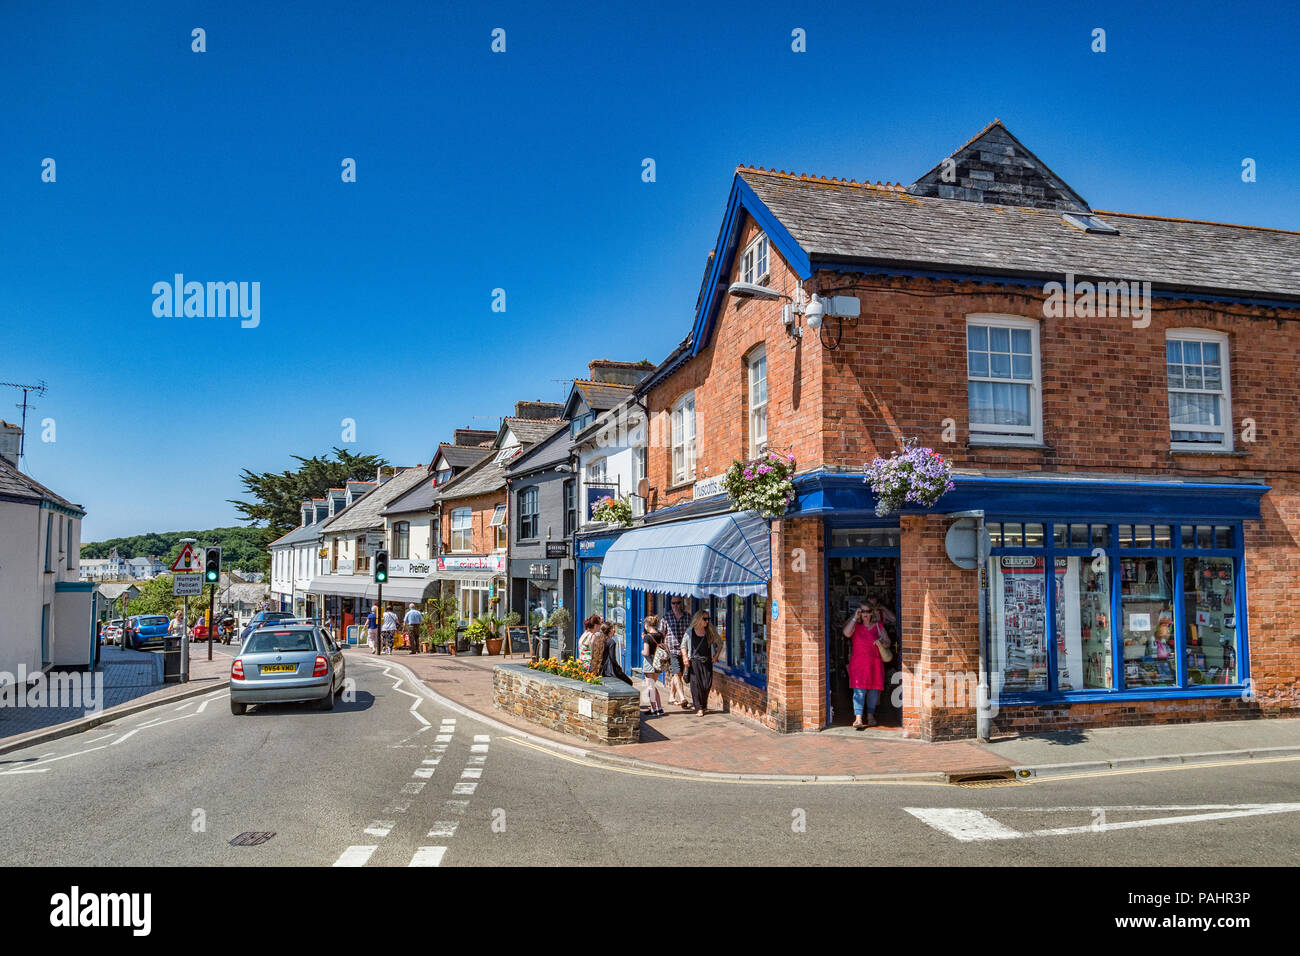 7 Juillet 2018 : Bude, Cornwall, UK - Shopping à Lansdown Road, Bude, Cornwall, UK Banque D'Images